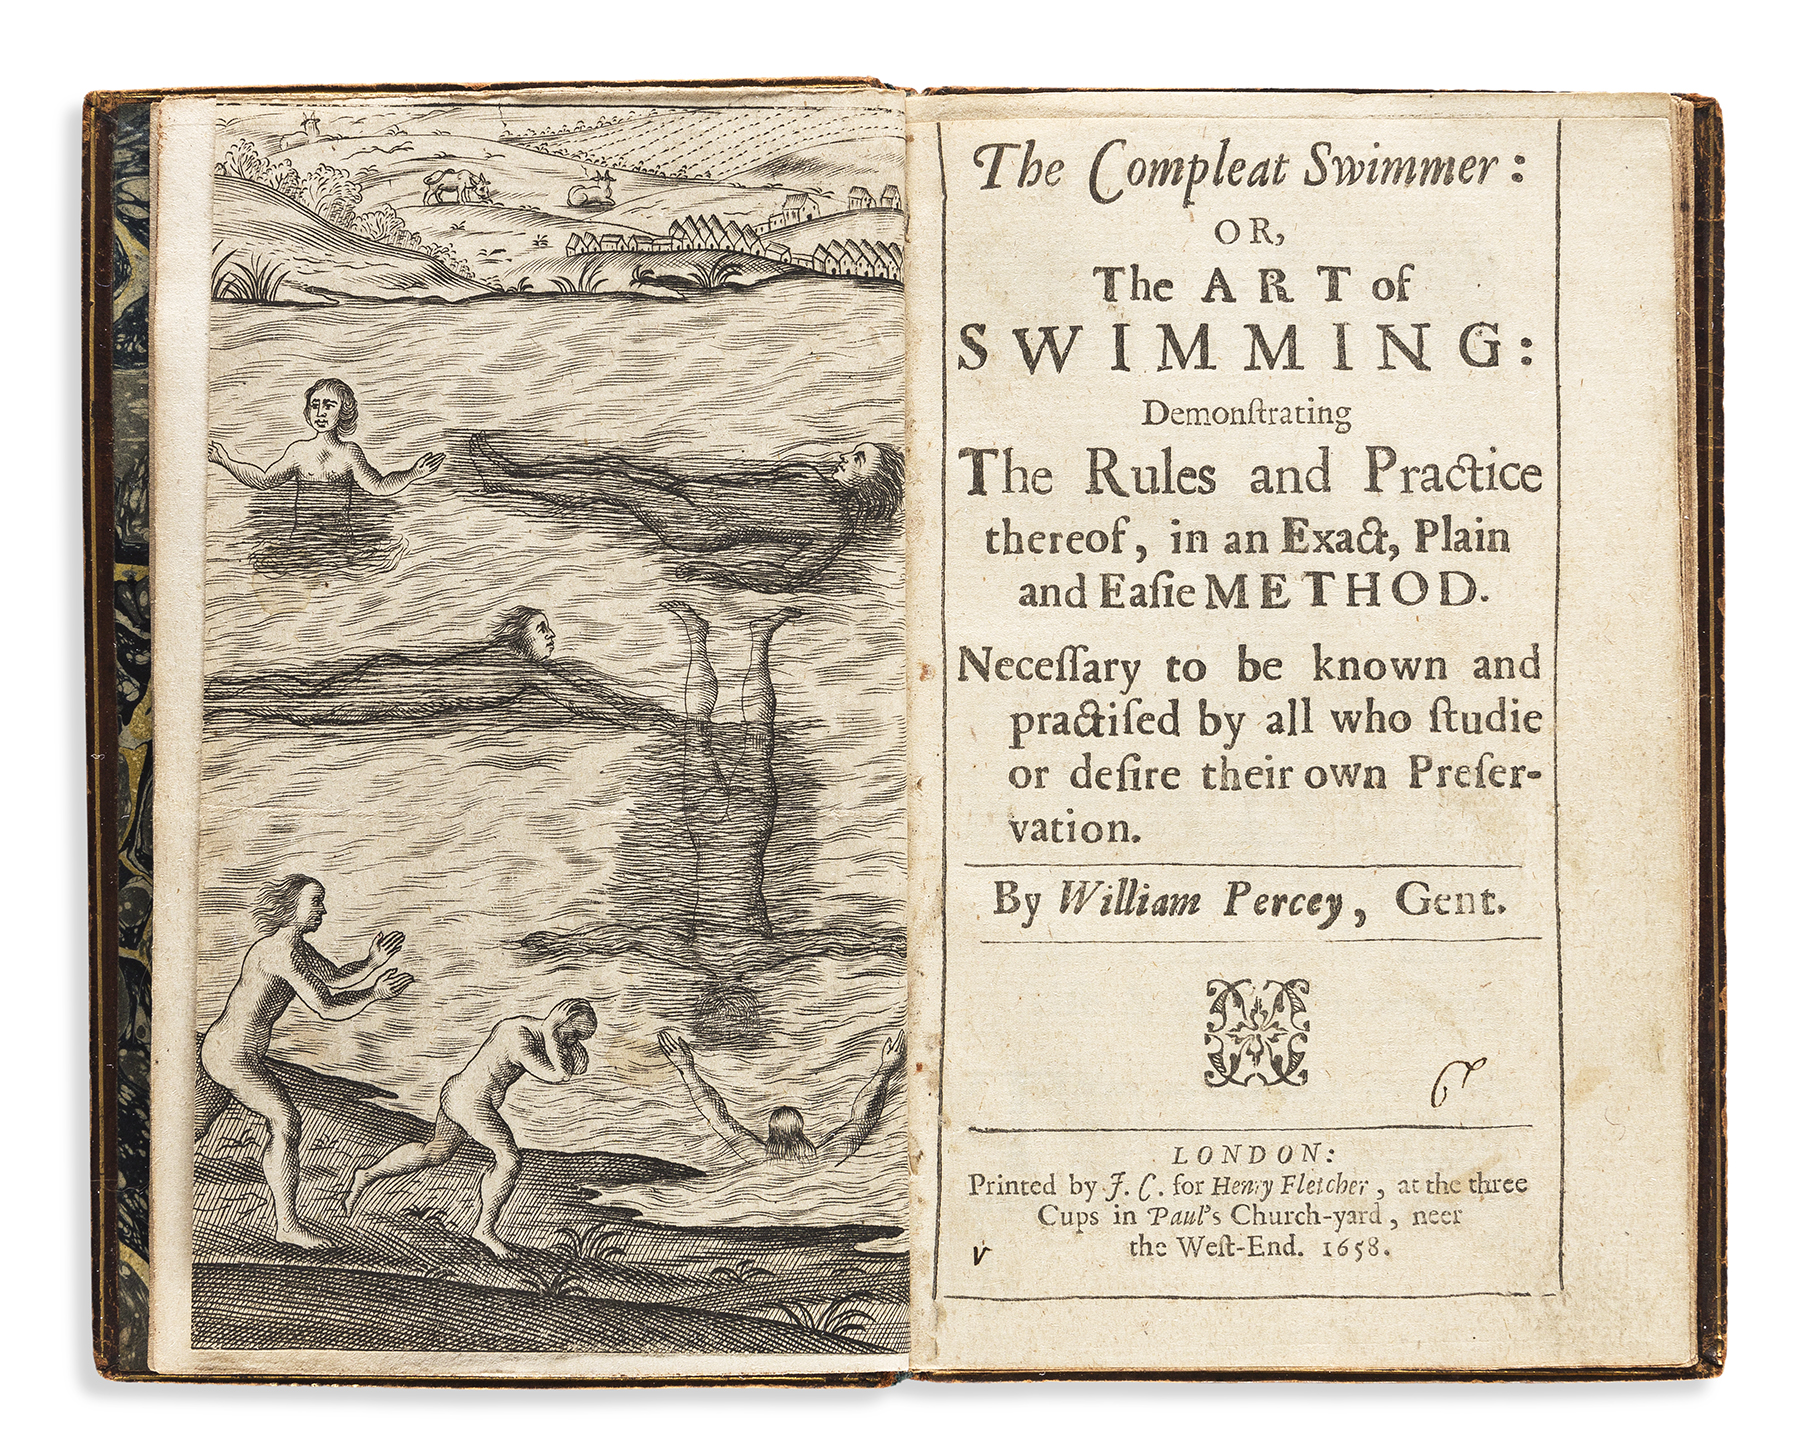 Everard Digby, trans. William Percy, 'The Compleat Swimmer or the Art of Swimming,' first edition, London, 1658, $6,000-$9,000